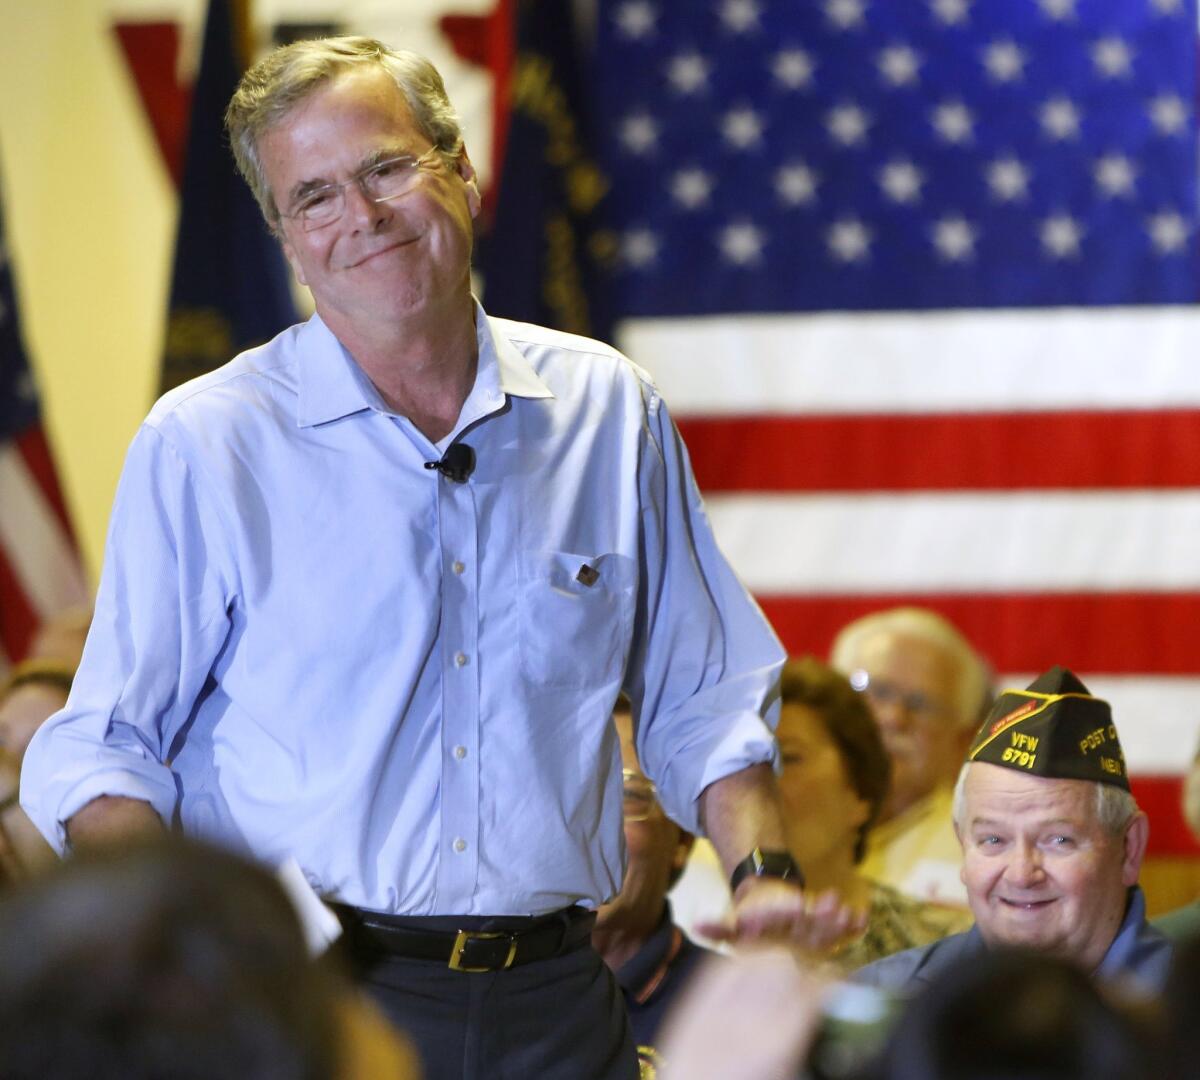 Republican presidential candidate Jeb Bush speaks at a town hall meeting on July 8, in Hudson, N.H. Bush raised $11.4 million in 16 days after formally launching his campaign for president, his campaign said Thursday.